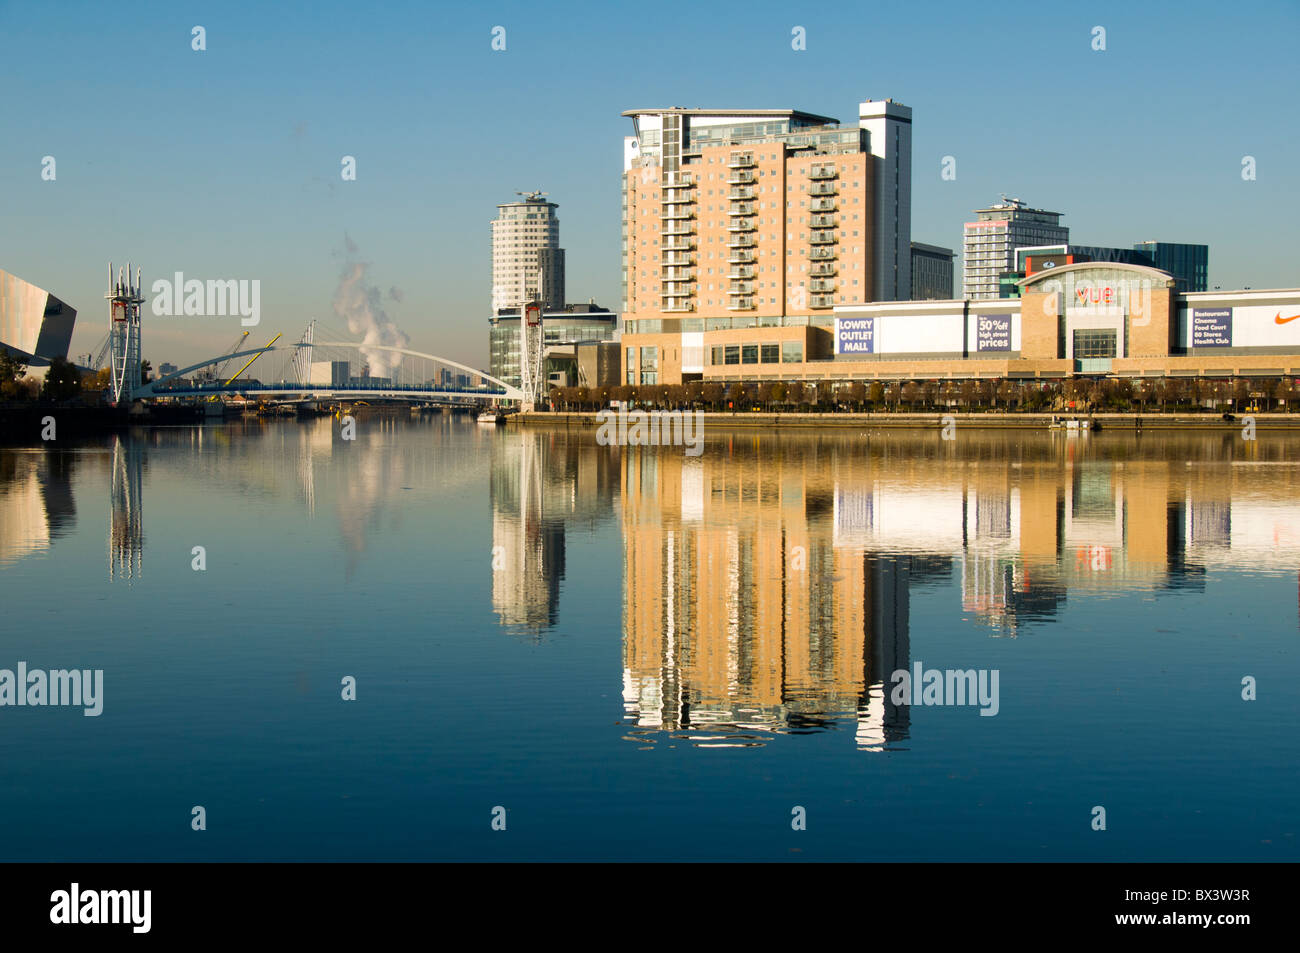 The Millennium footbridge, Imperial Point apartments and The Lowry Outlet Mall at Salford Quays, Manchester, England, UK Stock Photo